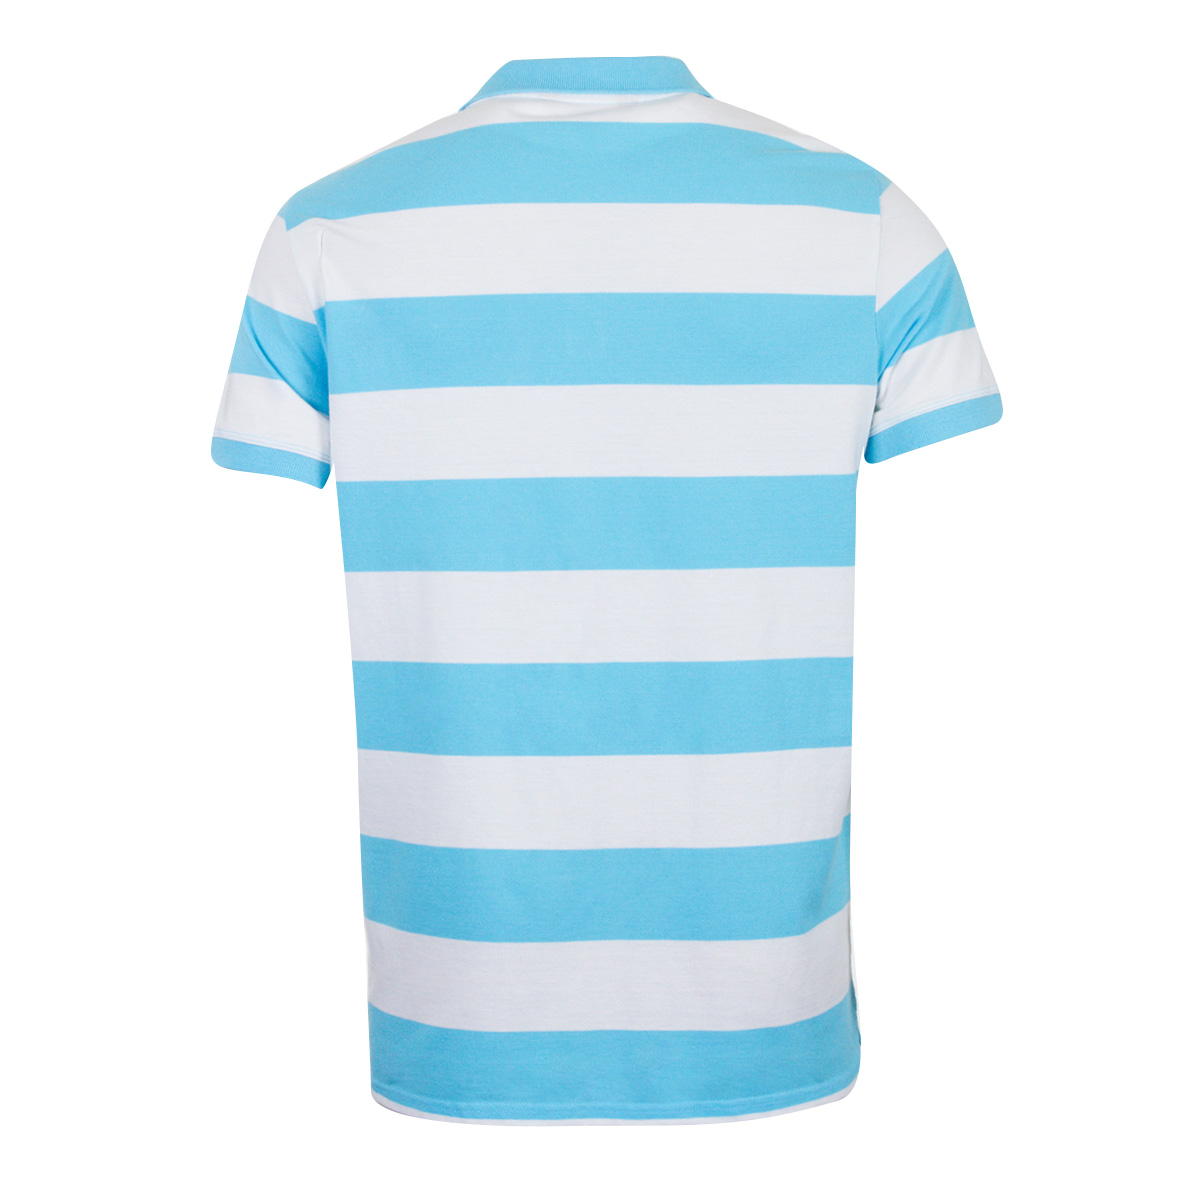 Rugbystore Argentina 1910 Mens Striped Polo Shirt - Sky Blue and White ...